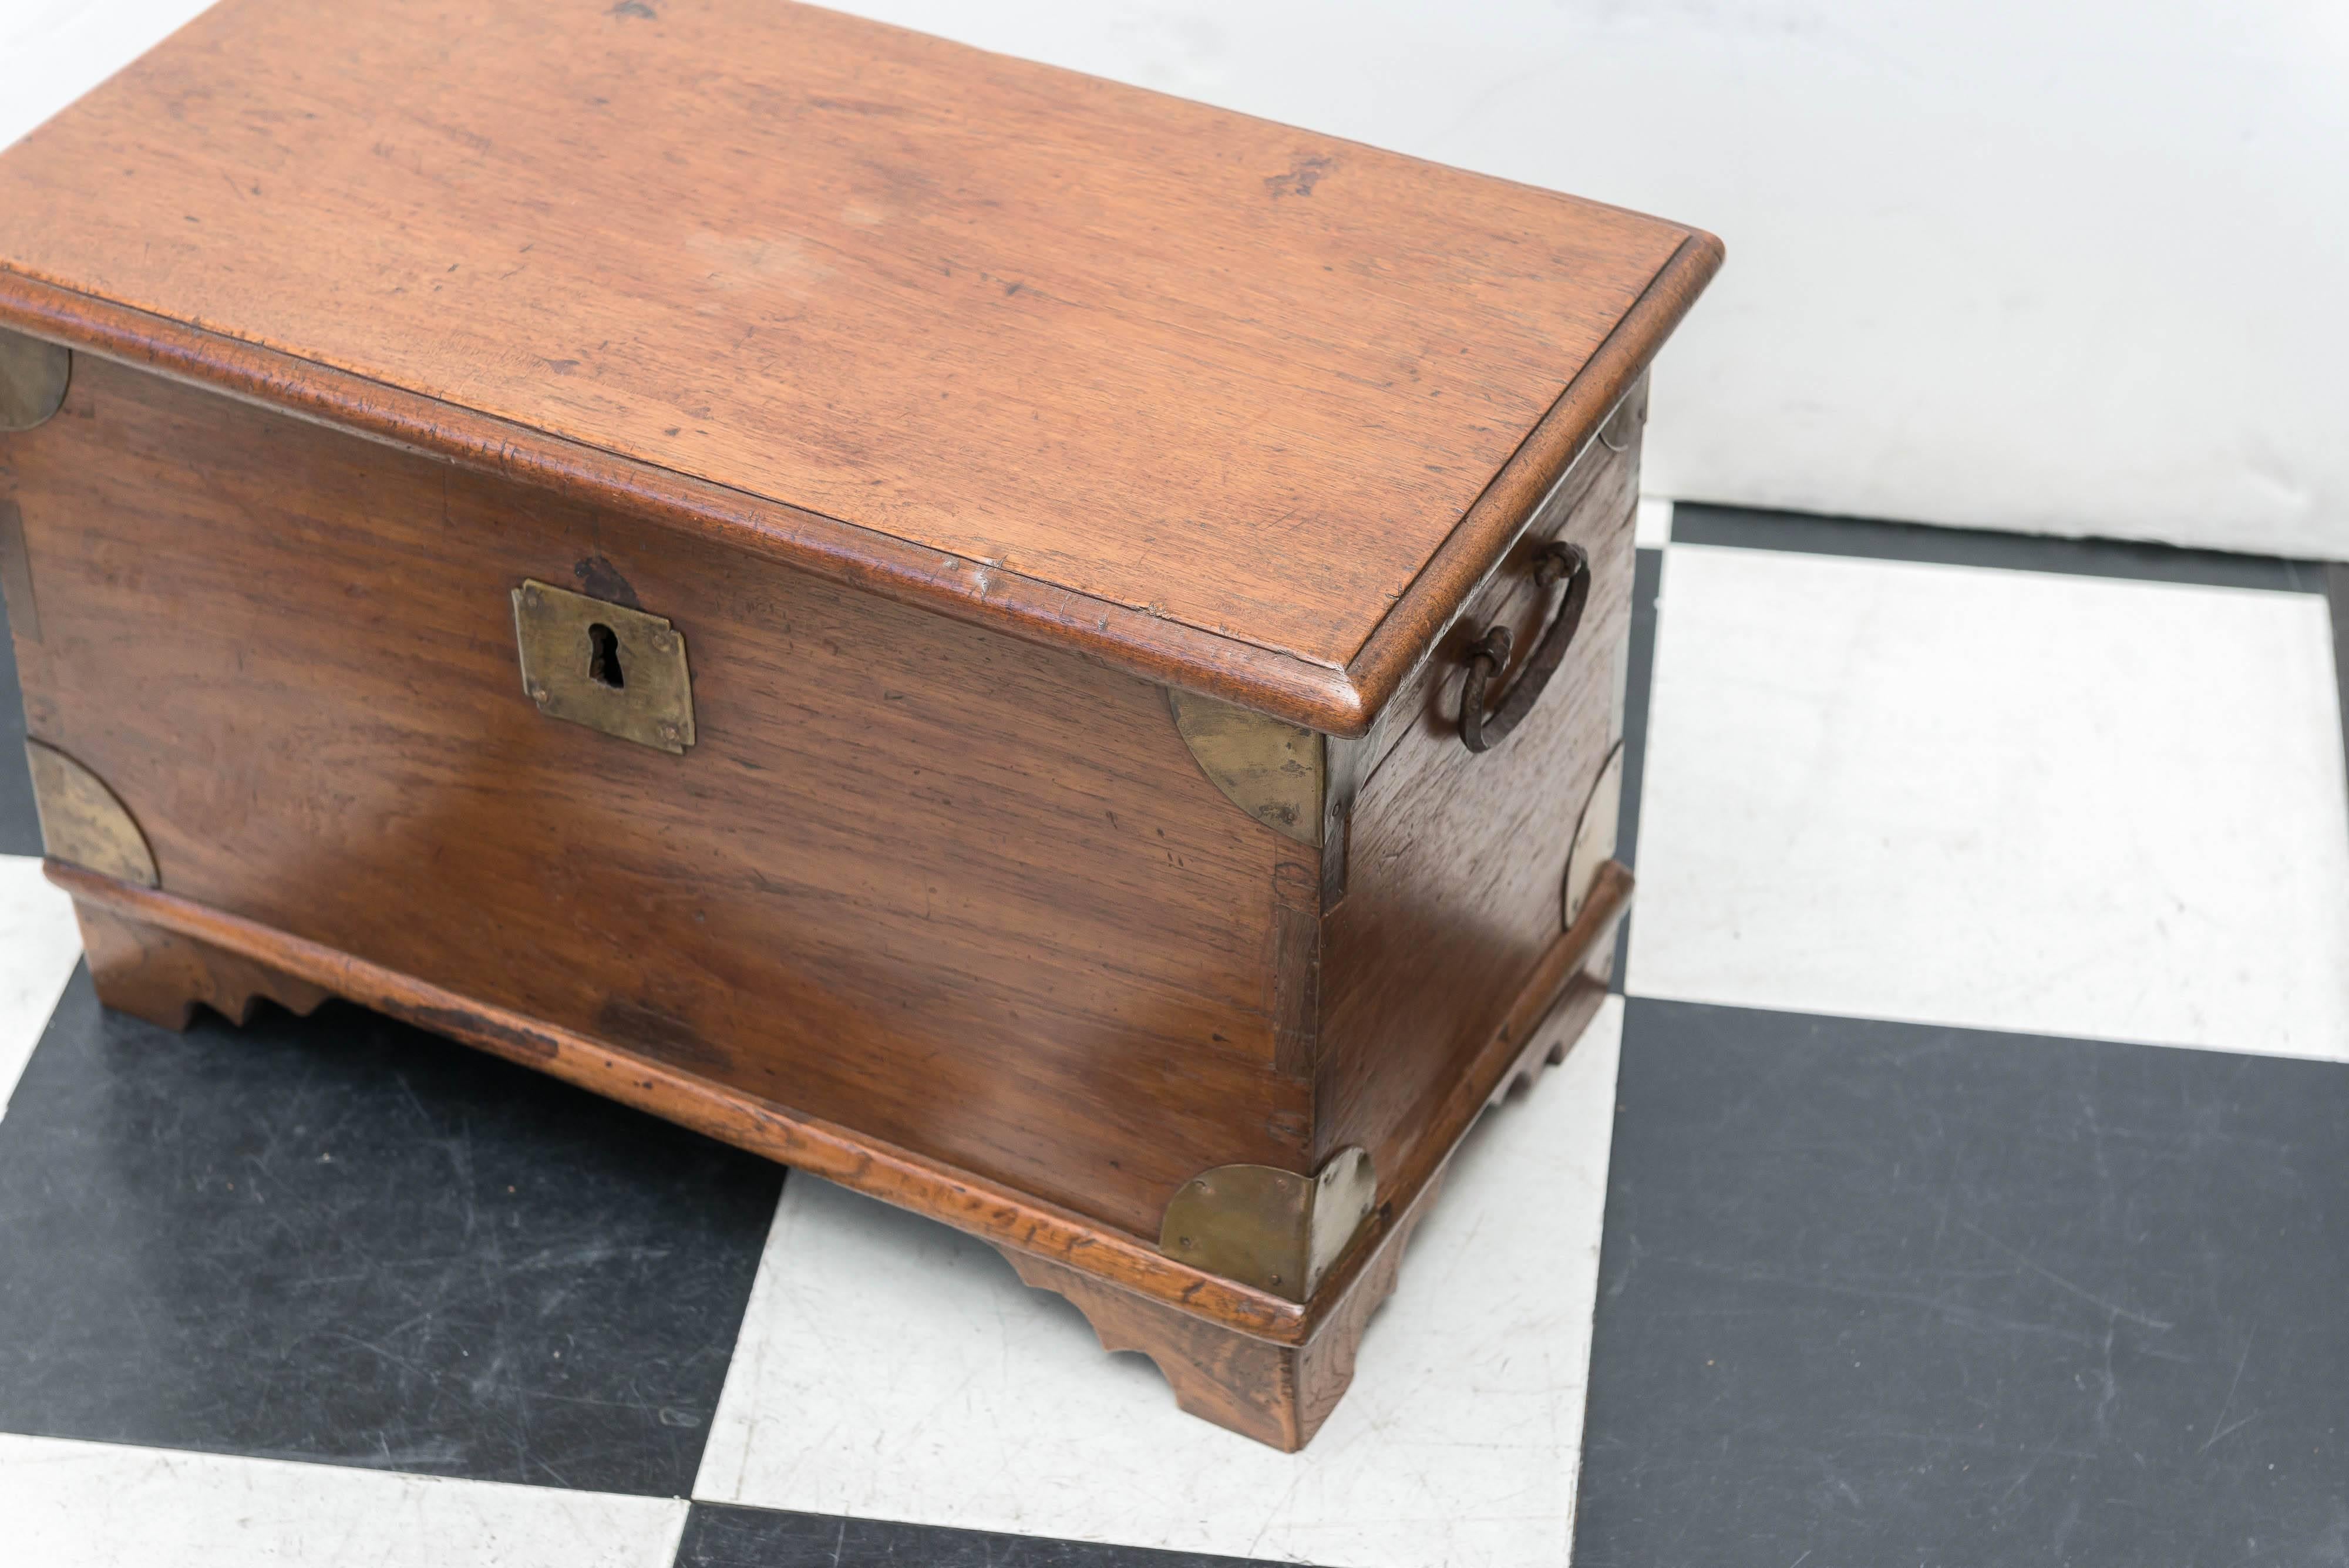 Diminutive late 19th century Anglo Indian trunk raised on small bracket feet. Plenty strong to sit on and tie your shoes. Lots of room for shoes and other treasures. Old brass handles and corners. Strong dovetail joinery. Useful as a step